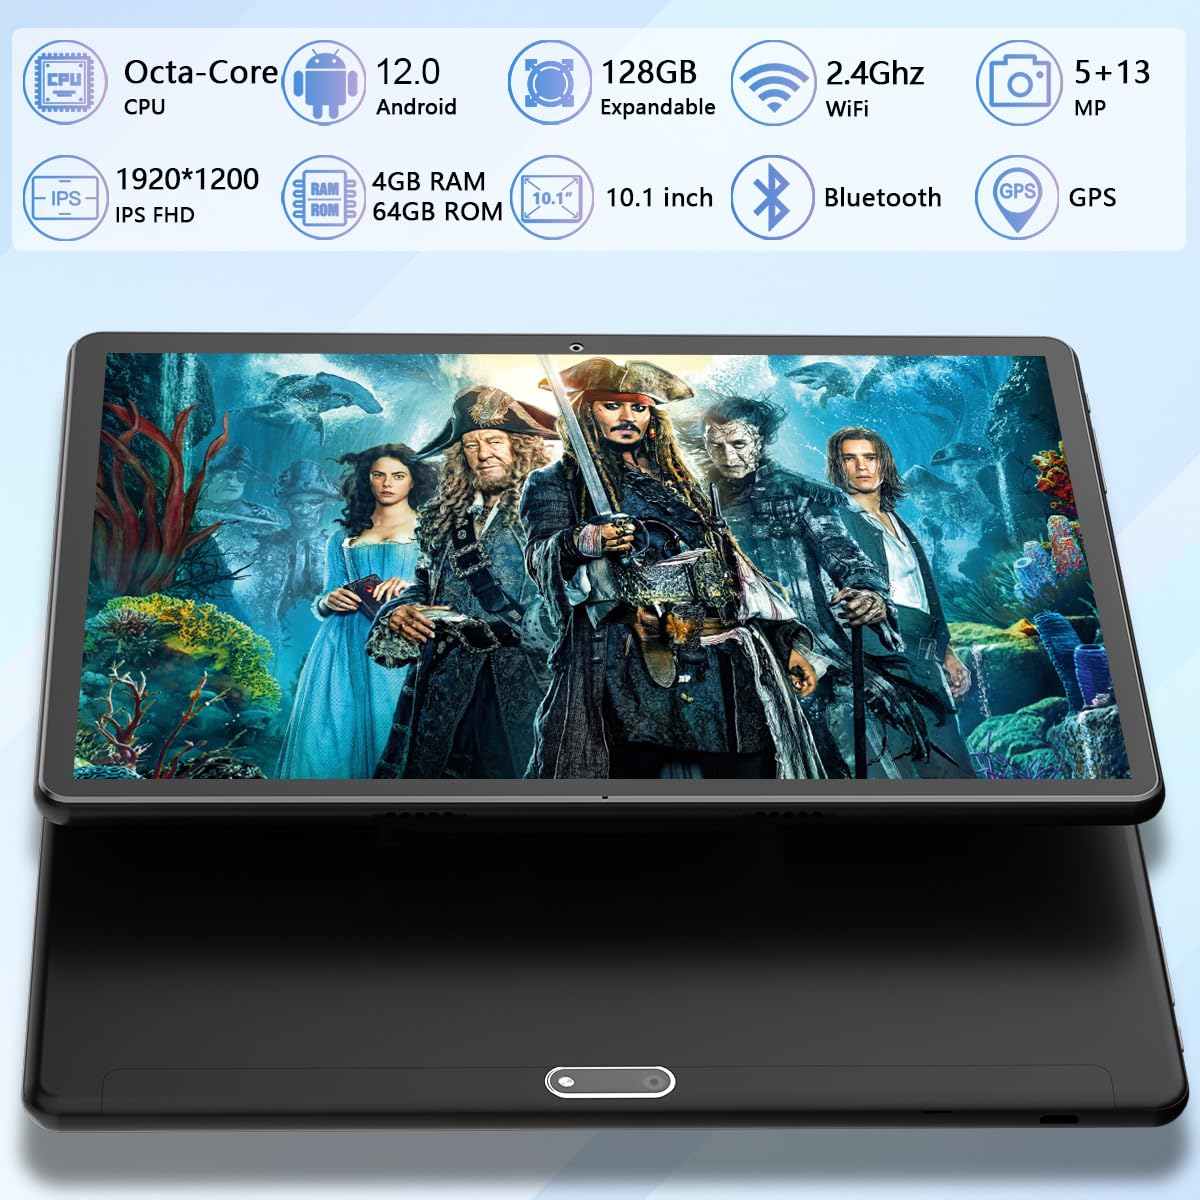 Tablet 10.1 inch Android 12 Tablet 2023 Latest Update Octa-Core Processor with 64GB Storage, Dual 13MP+5MP Camera, WiFi, Bluetooth, GPS, 512GB Expand Support, IPS Full HD Display (Black)